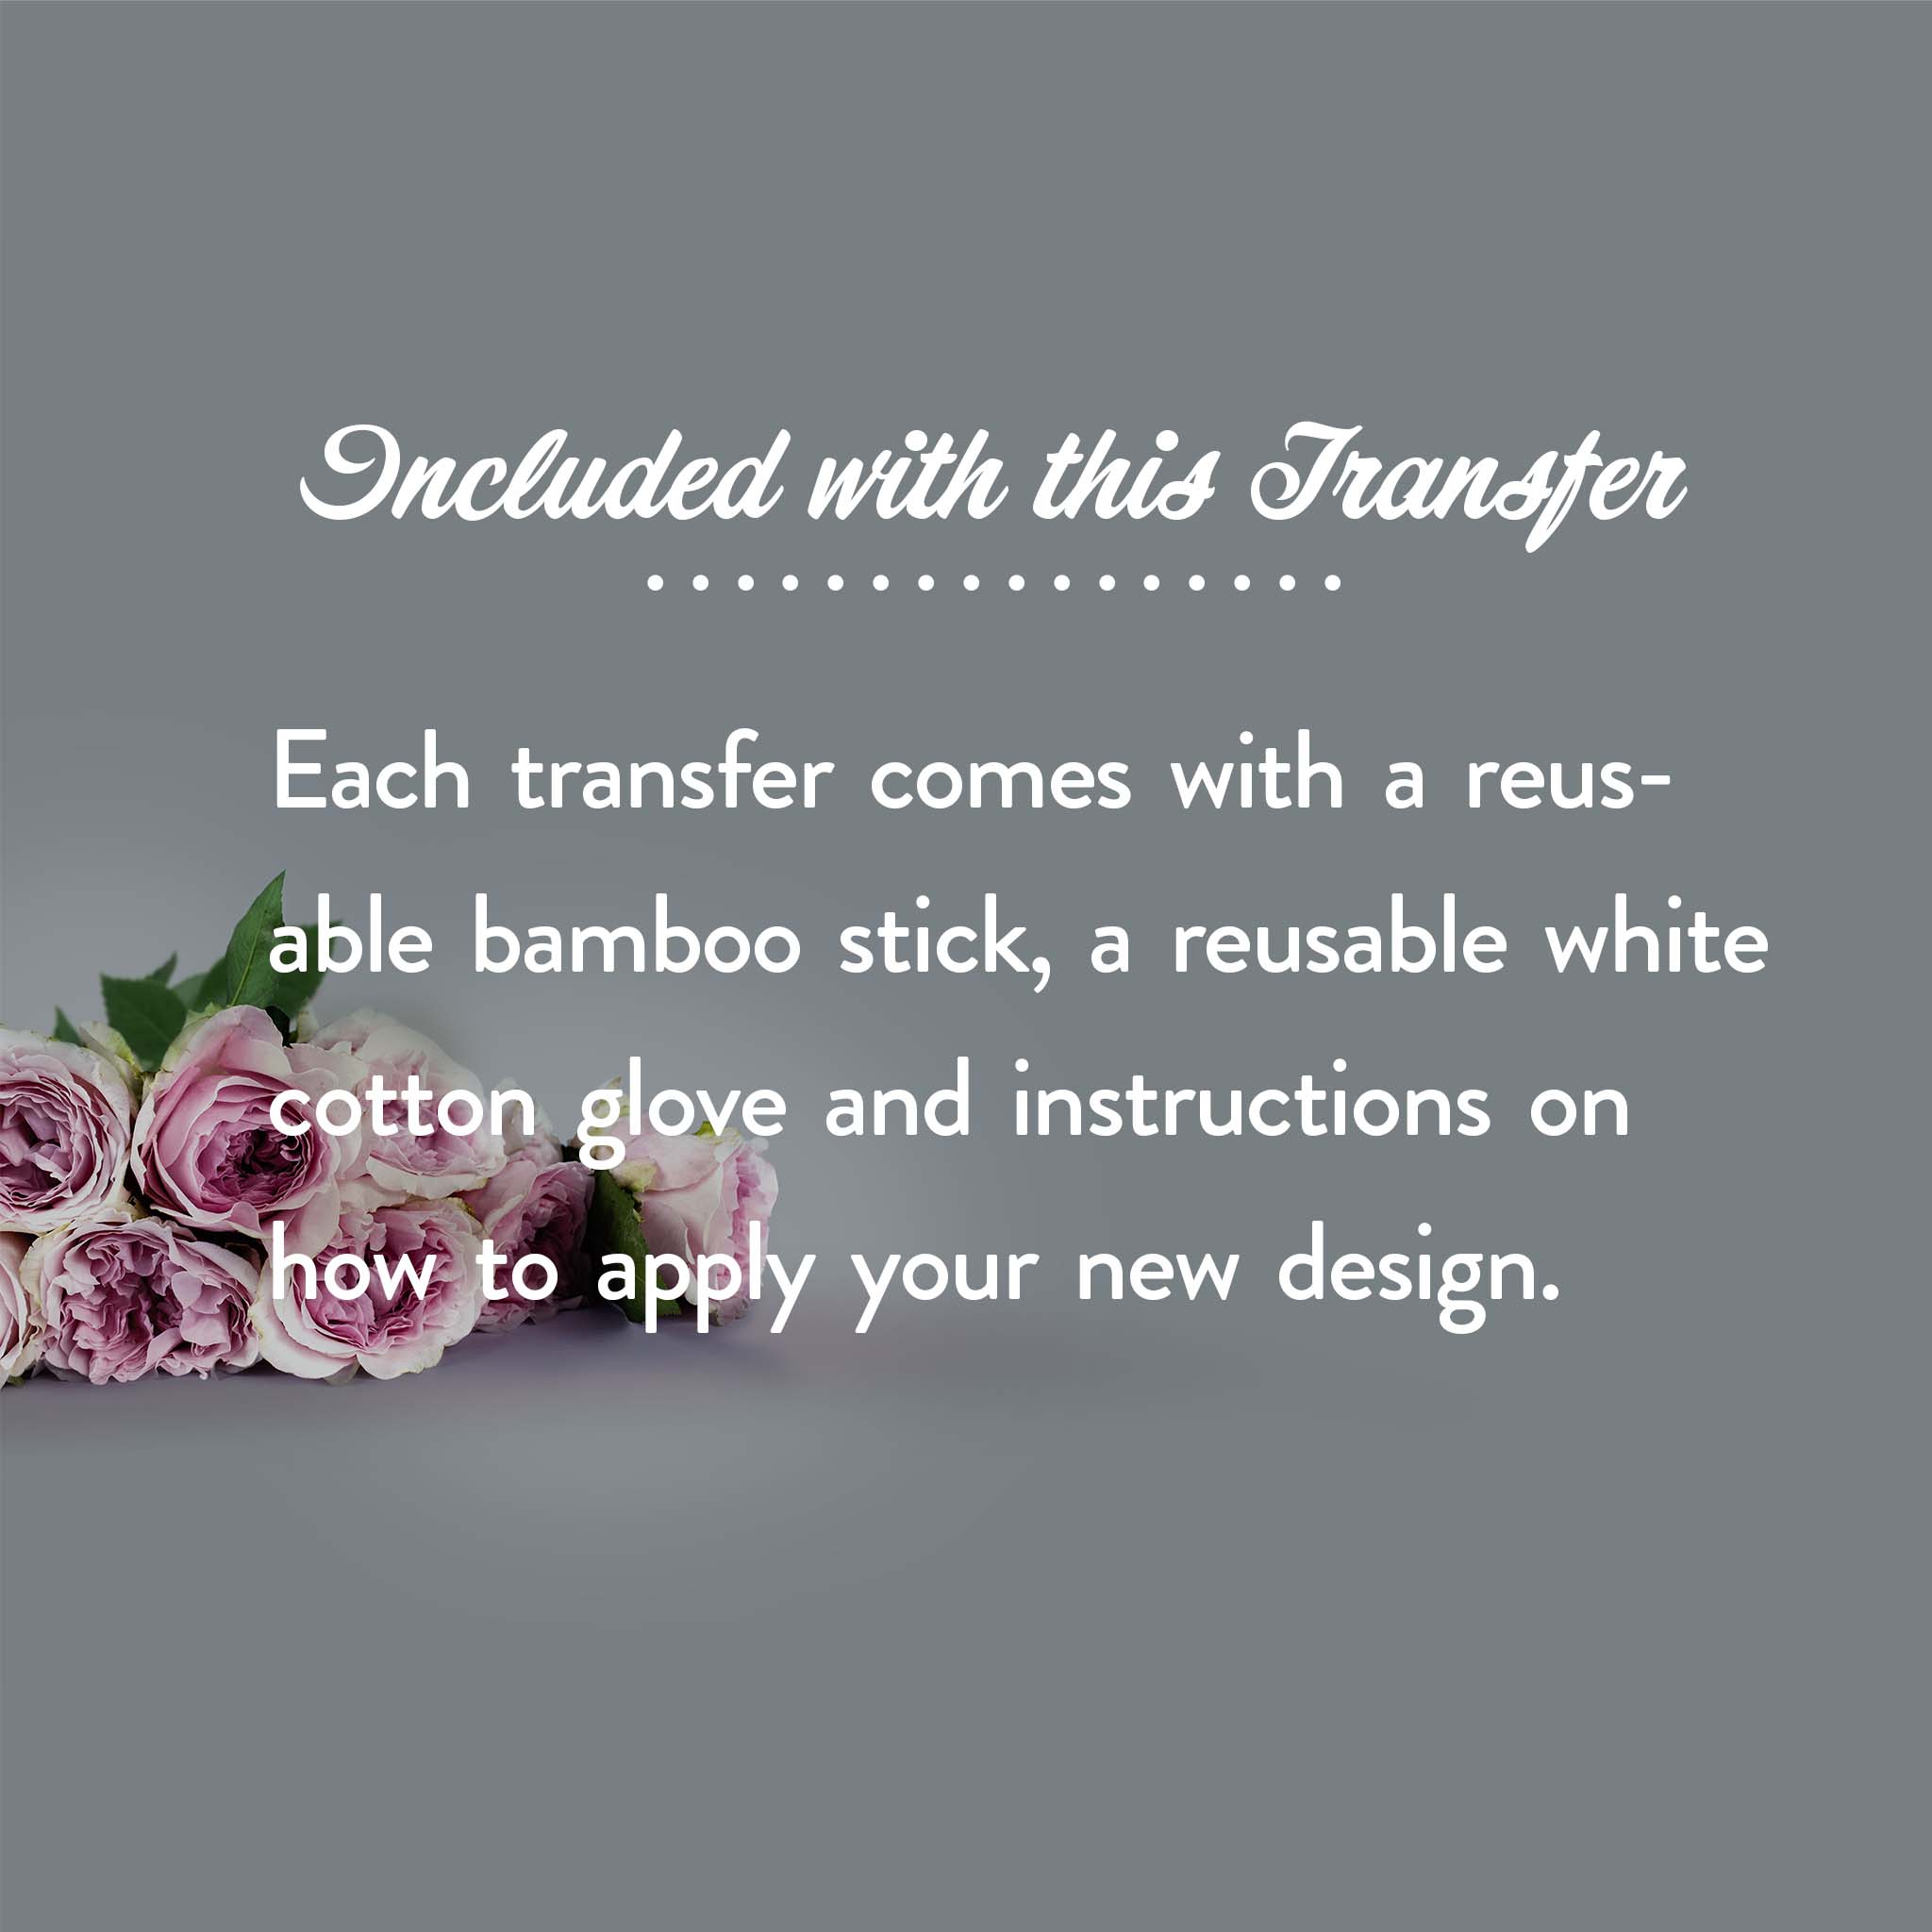 On a light grey background with a bouquet of white and light pink roses is white text that reads: Included with this Transfer - Each transfer comes with a resuable bamboo stick, a resuable white cotton glove and instructions on how to apply your new design.